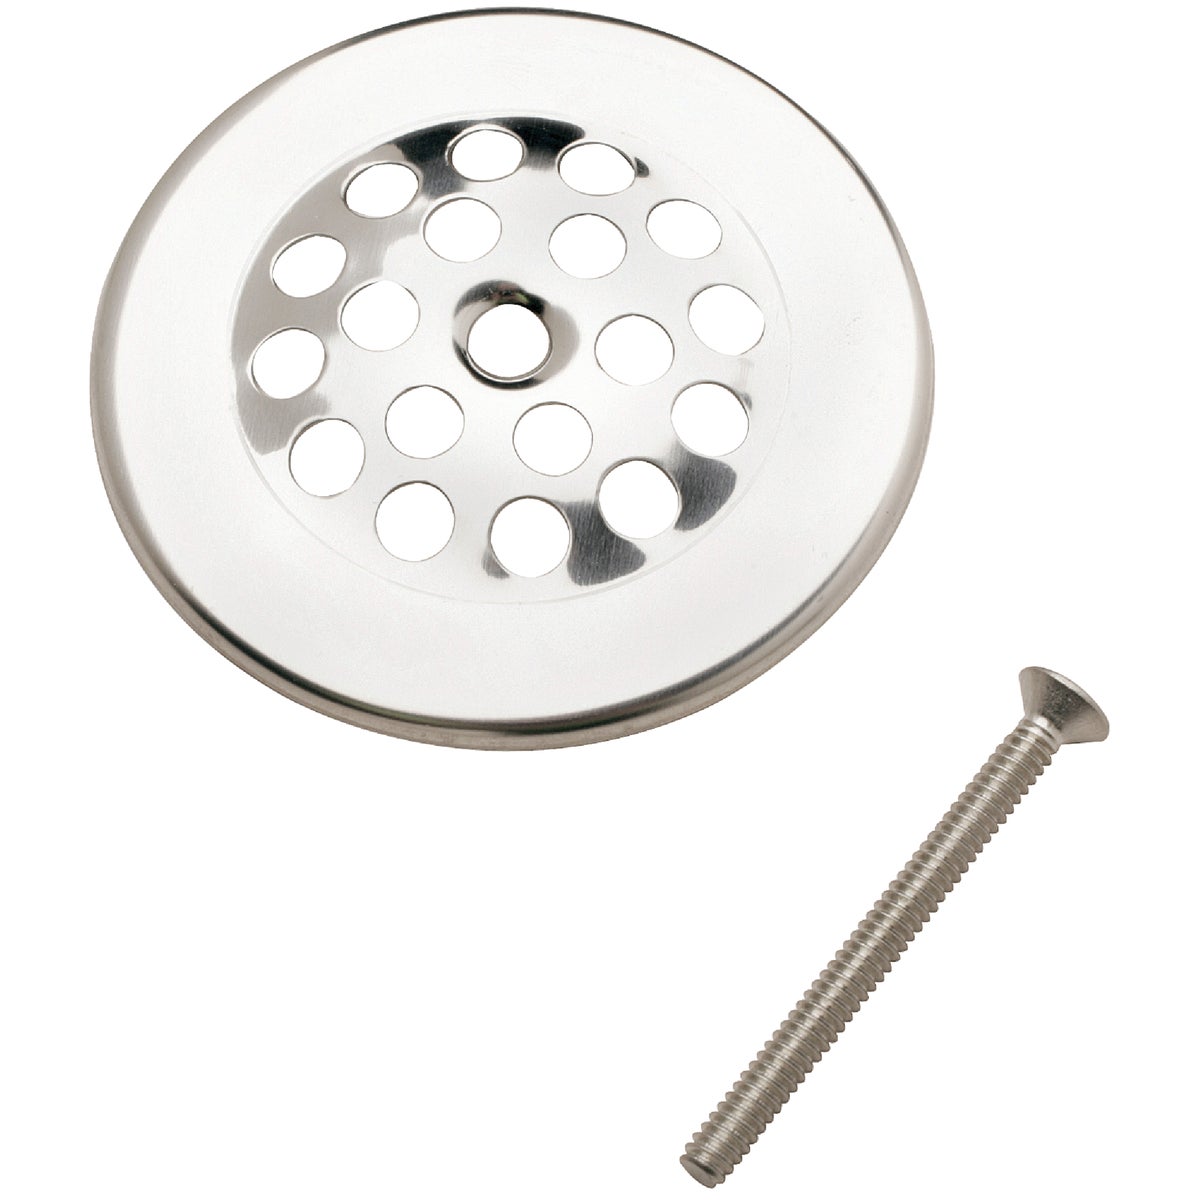 Item 438477, 2" O.D. strainer dome cover with screw for triplever bath drain.